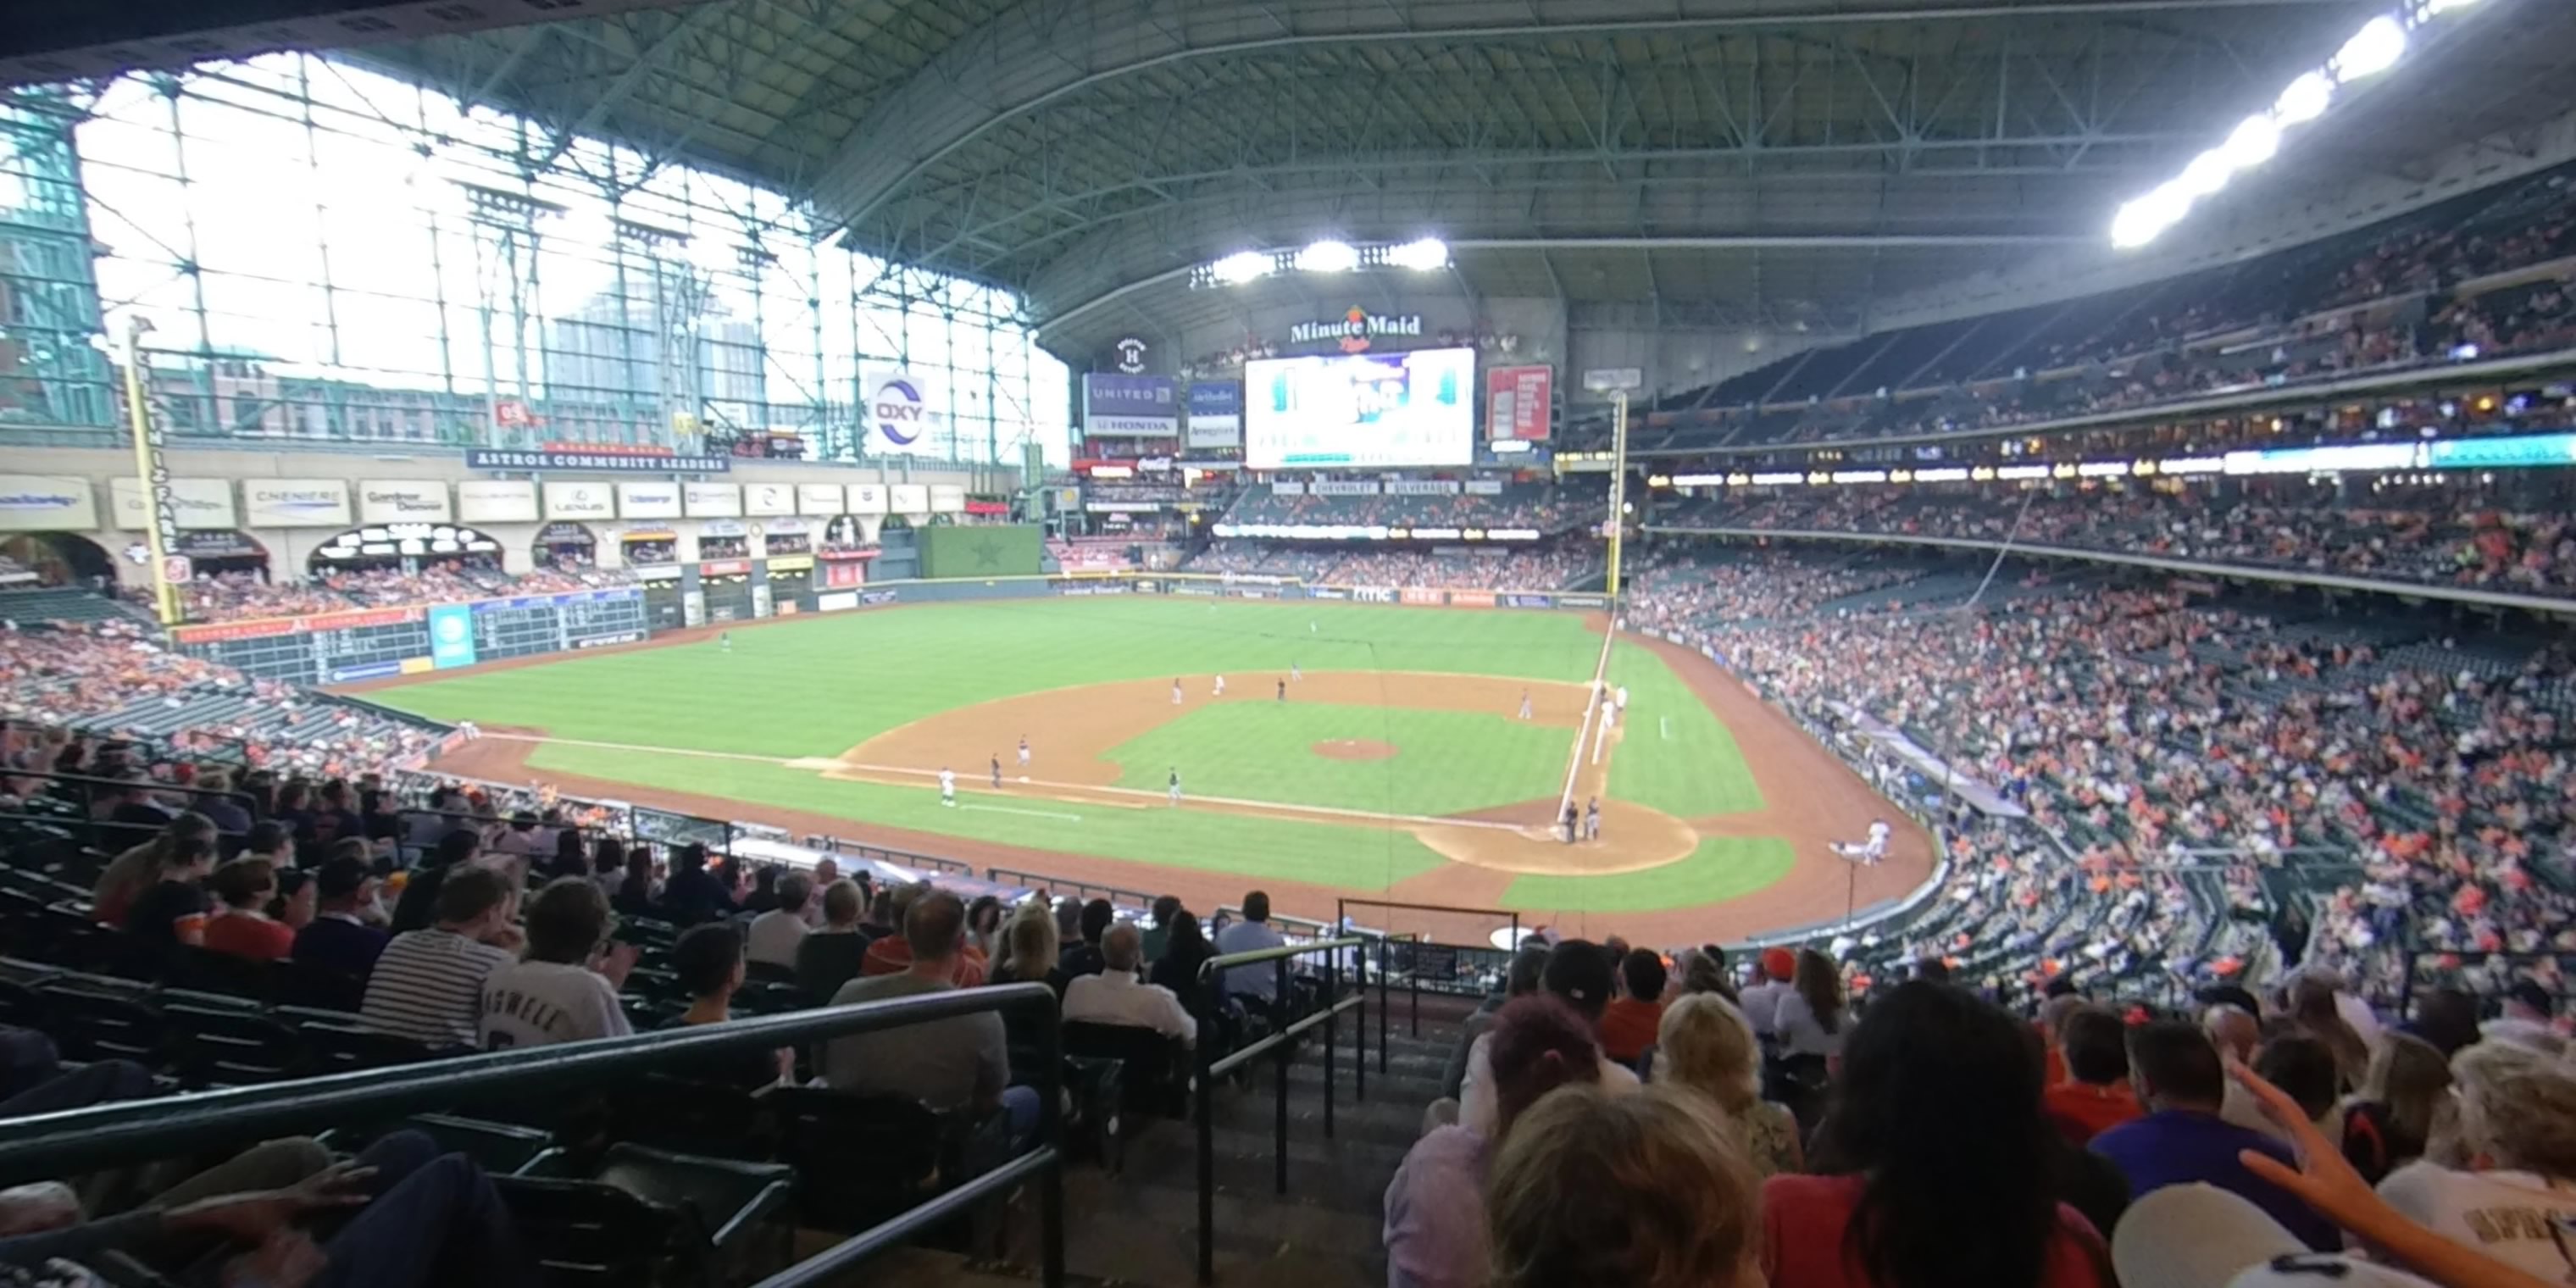 section 215 panoramic seat view  for baseball - minute maid park